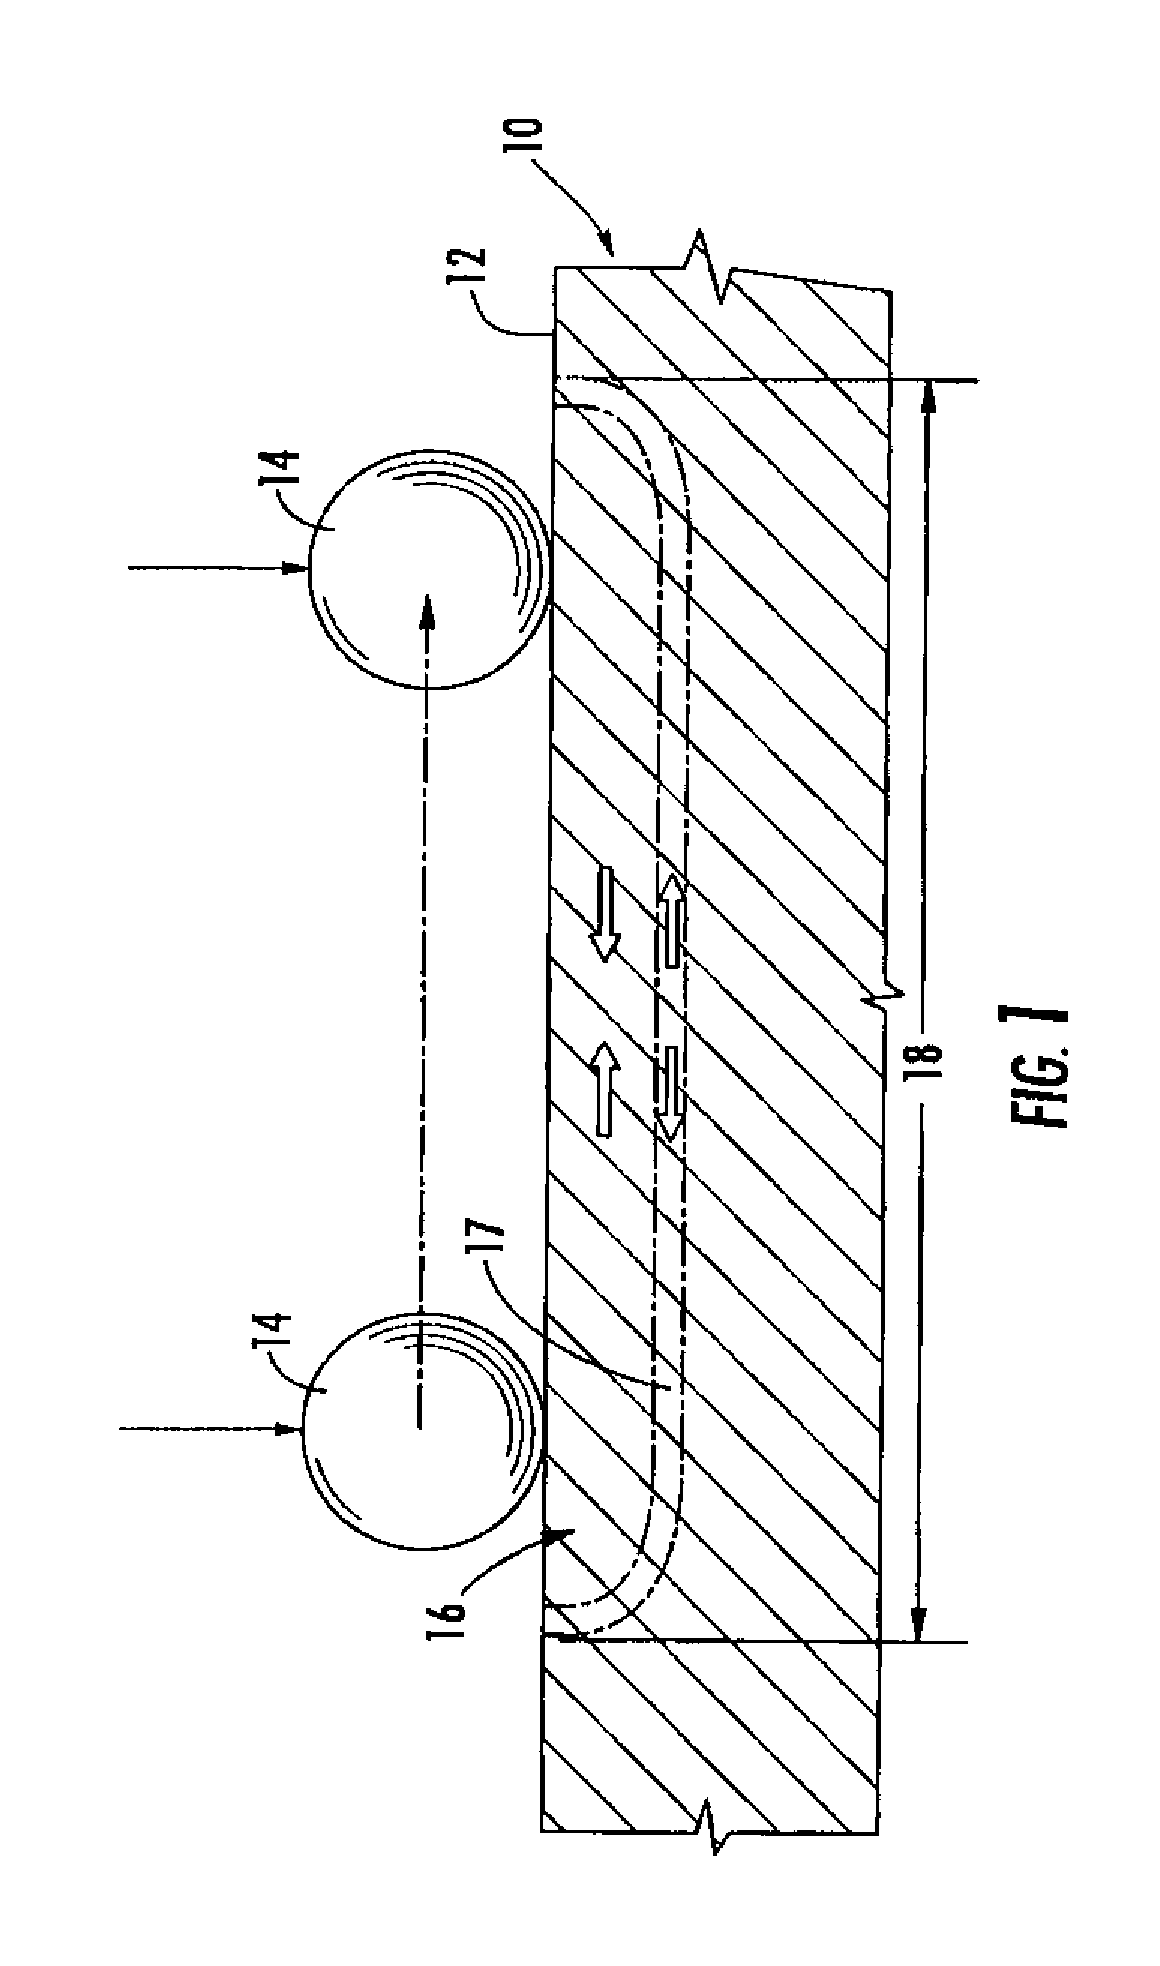 Component of variable thickness having residual compressive stresses therein, and method therefor